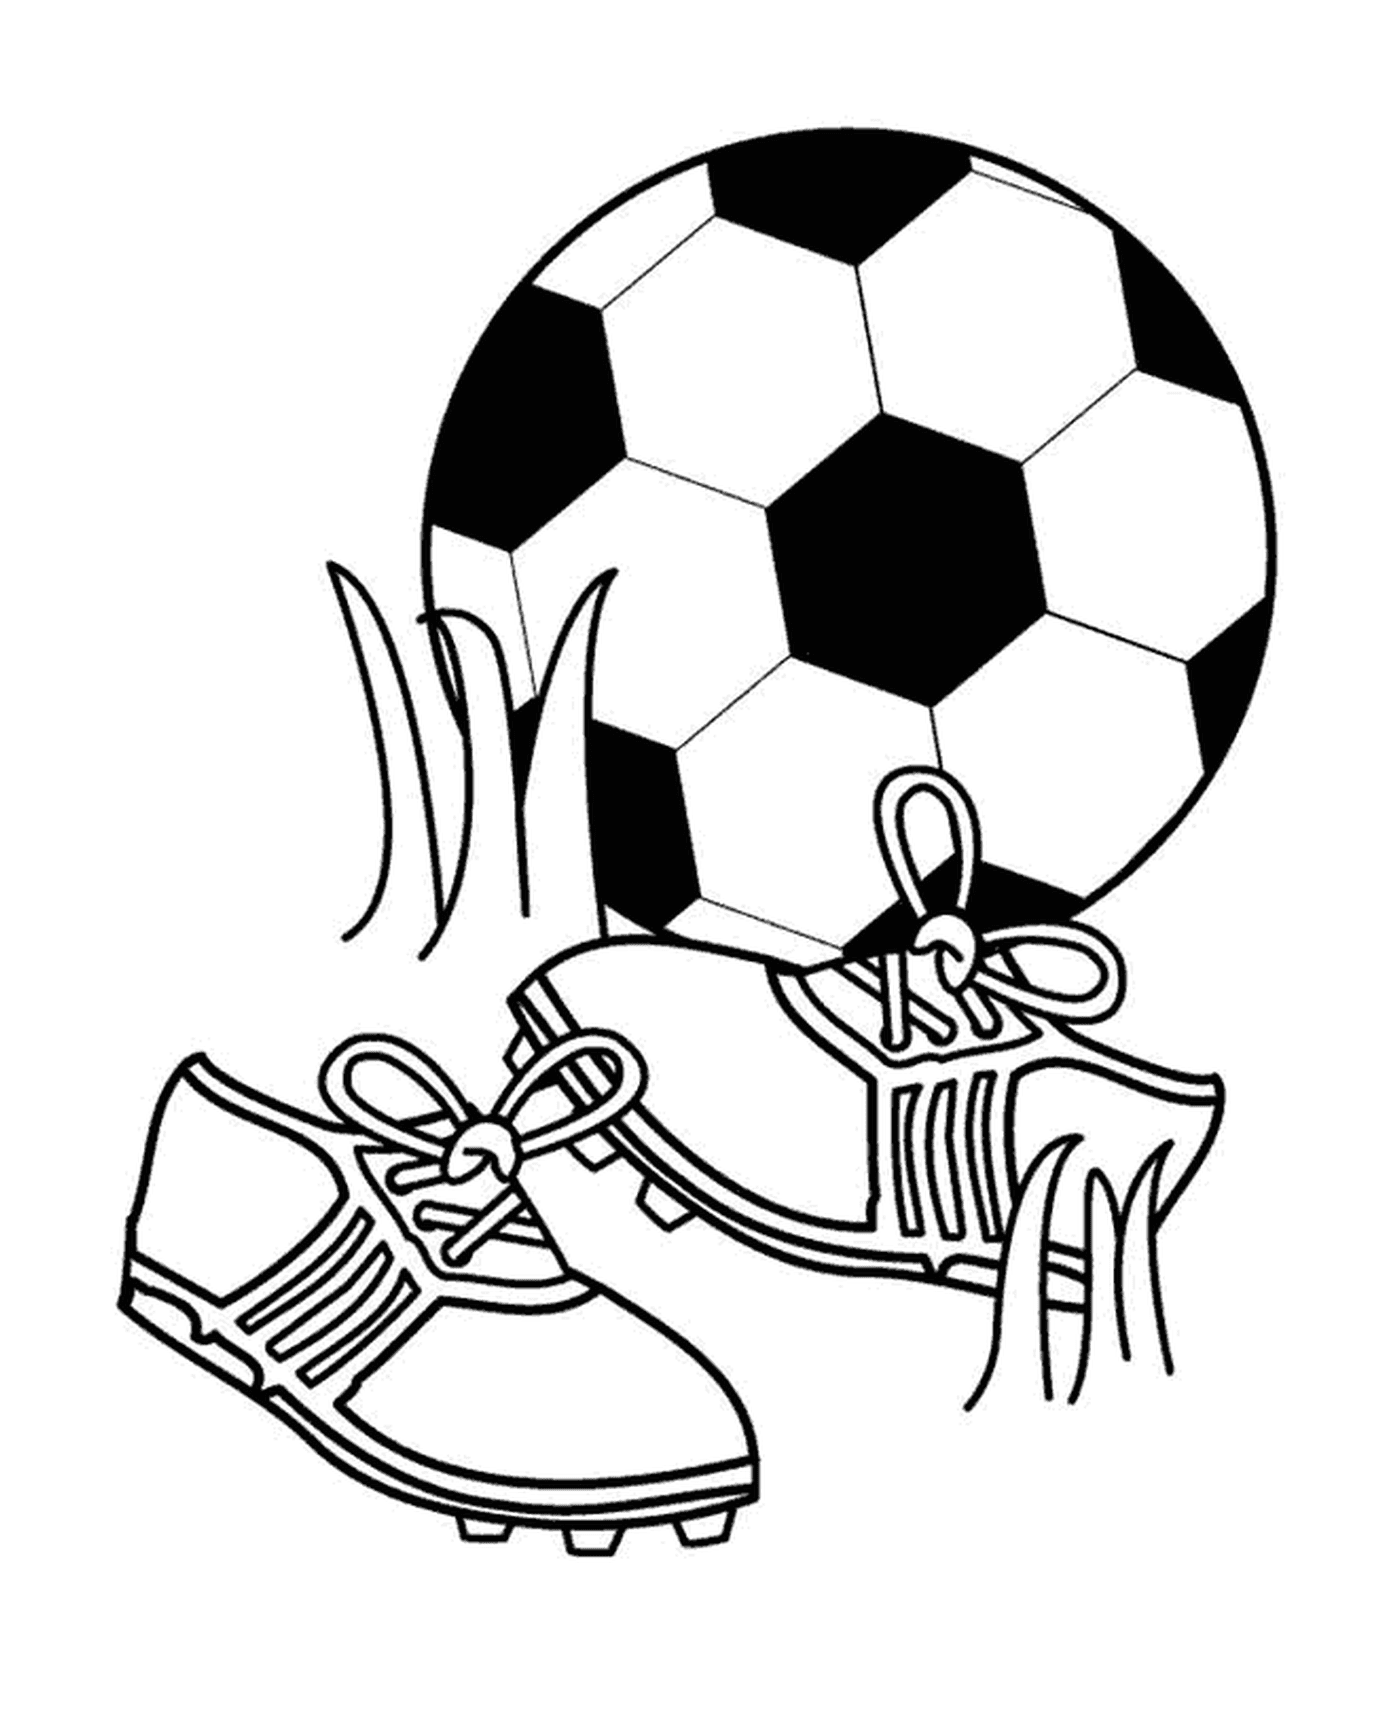  Sport, football and shoes 